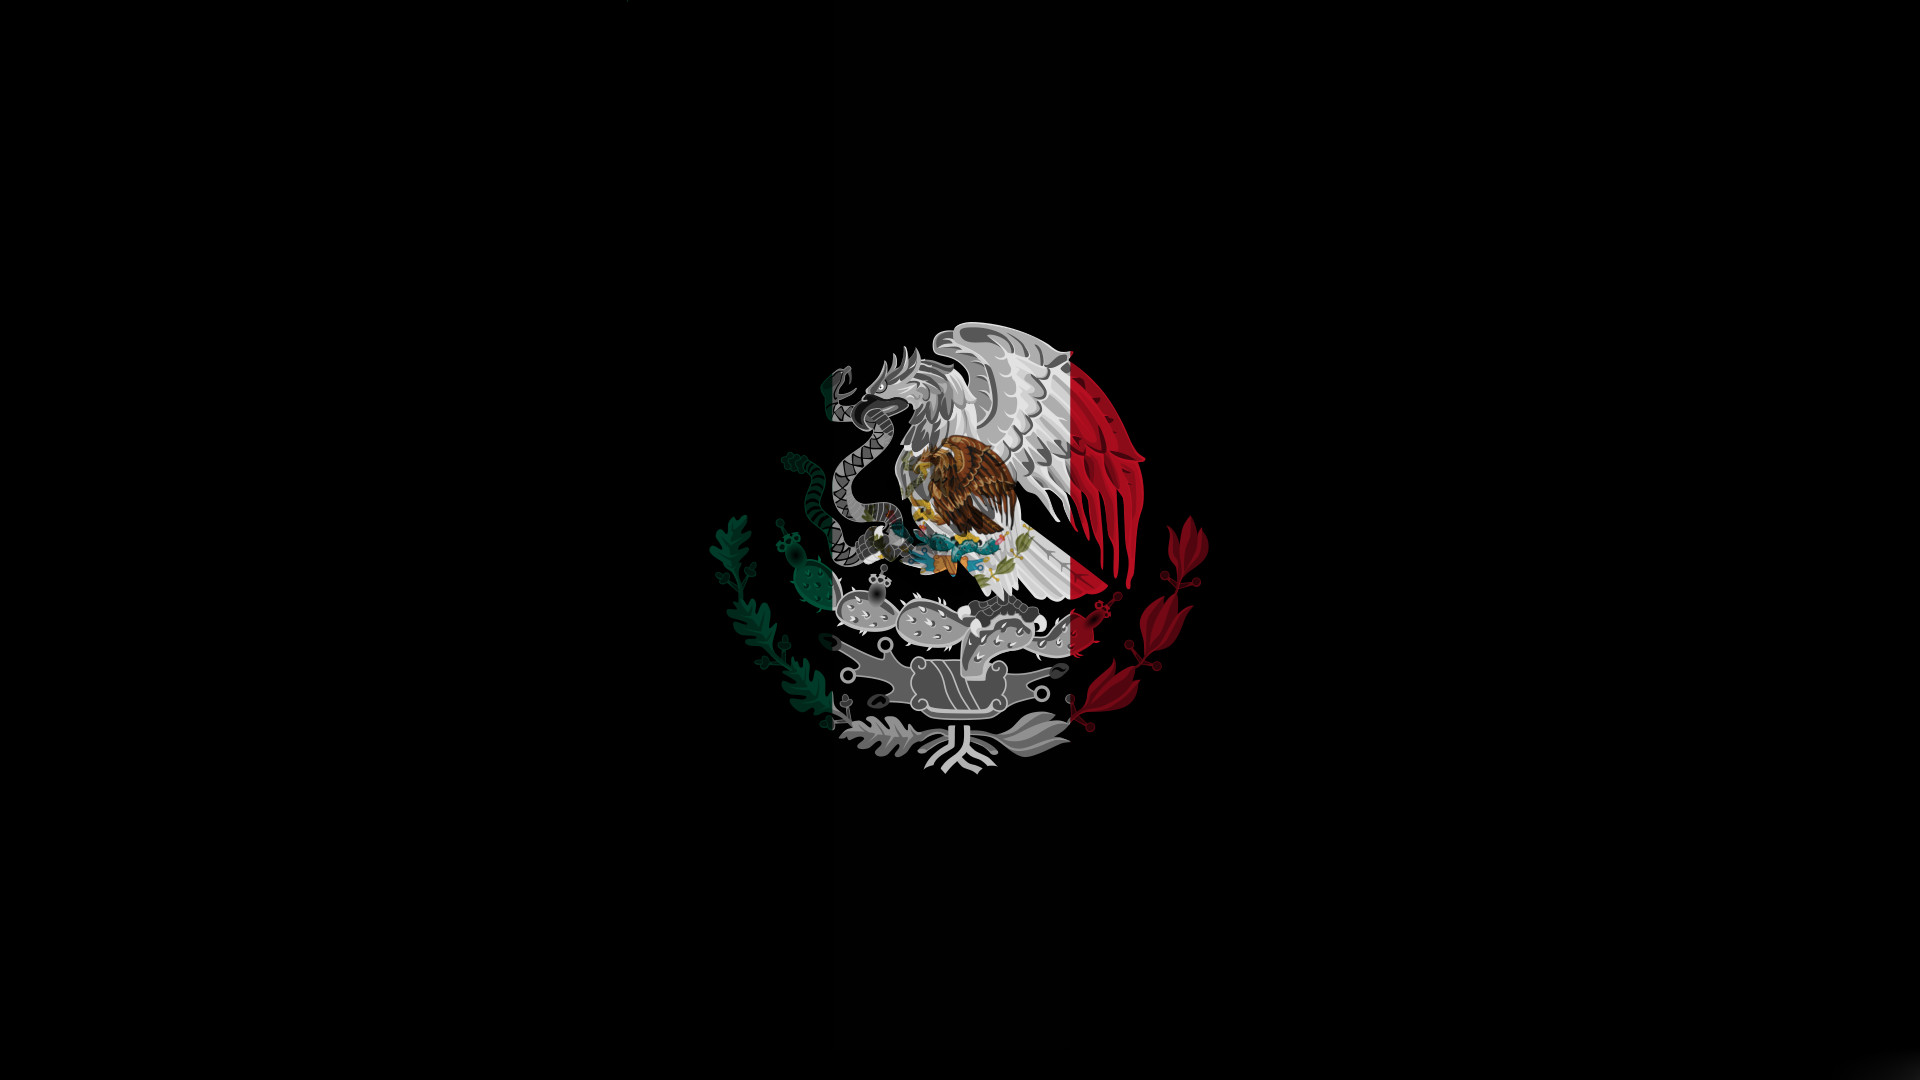 1920x1080 ... amazing mexico wallpapers amazing mexico wallpapers in hq ...